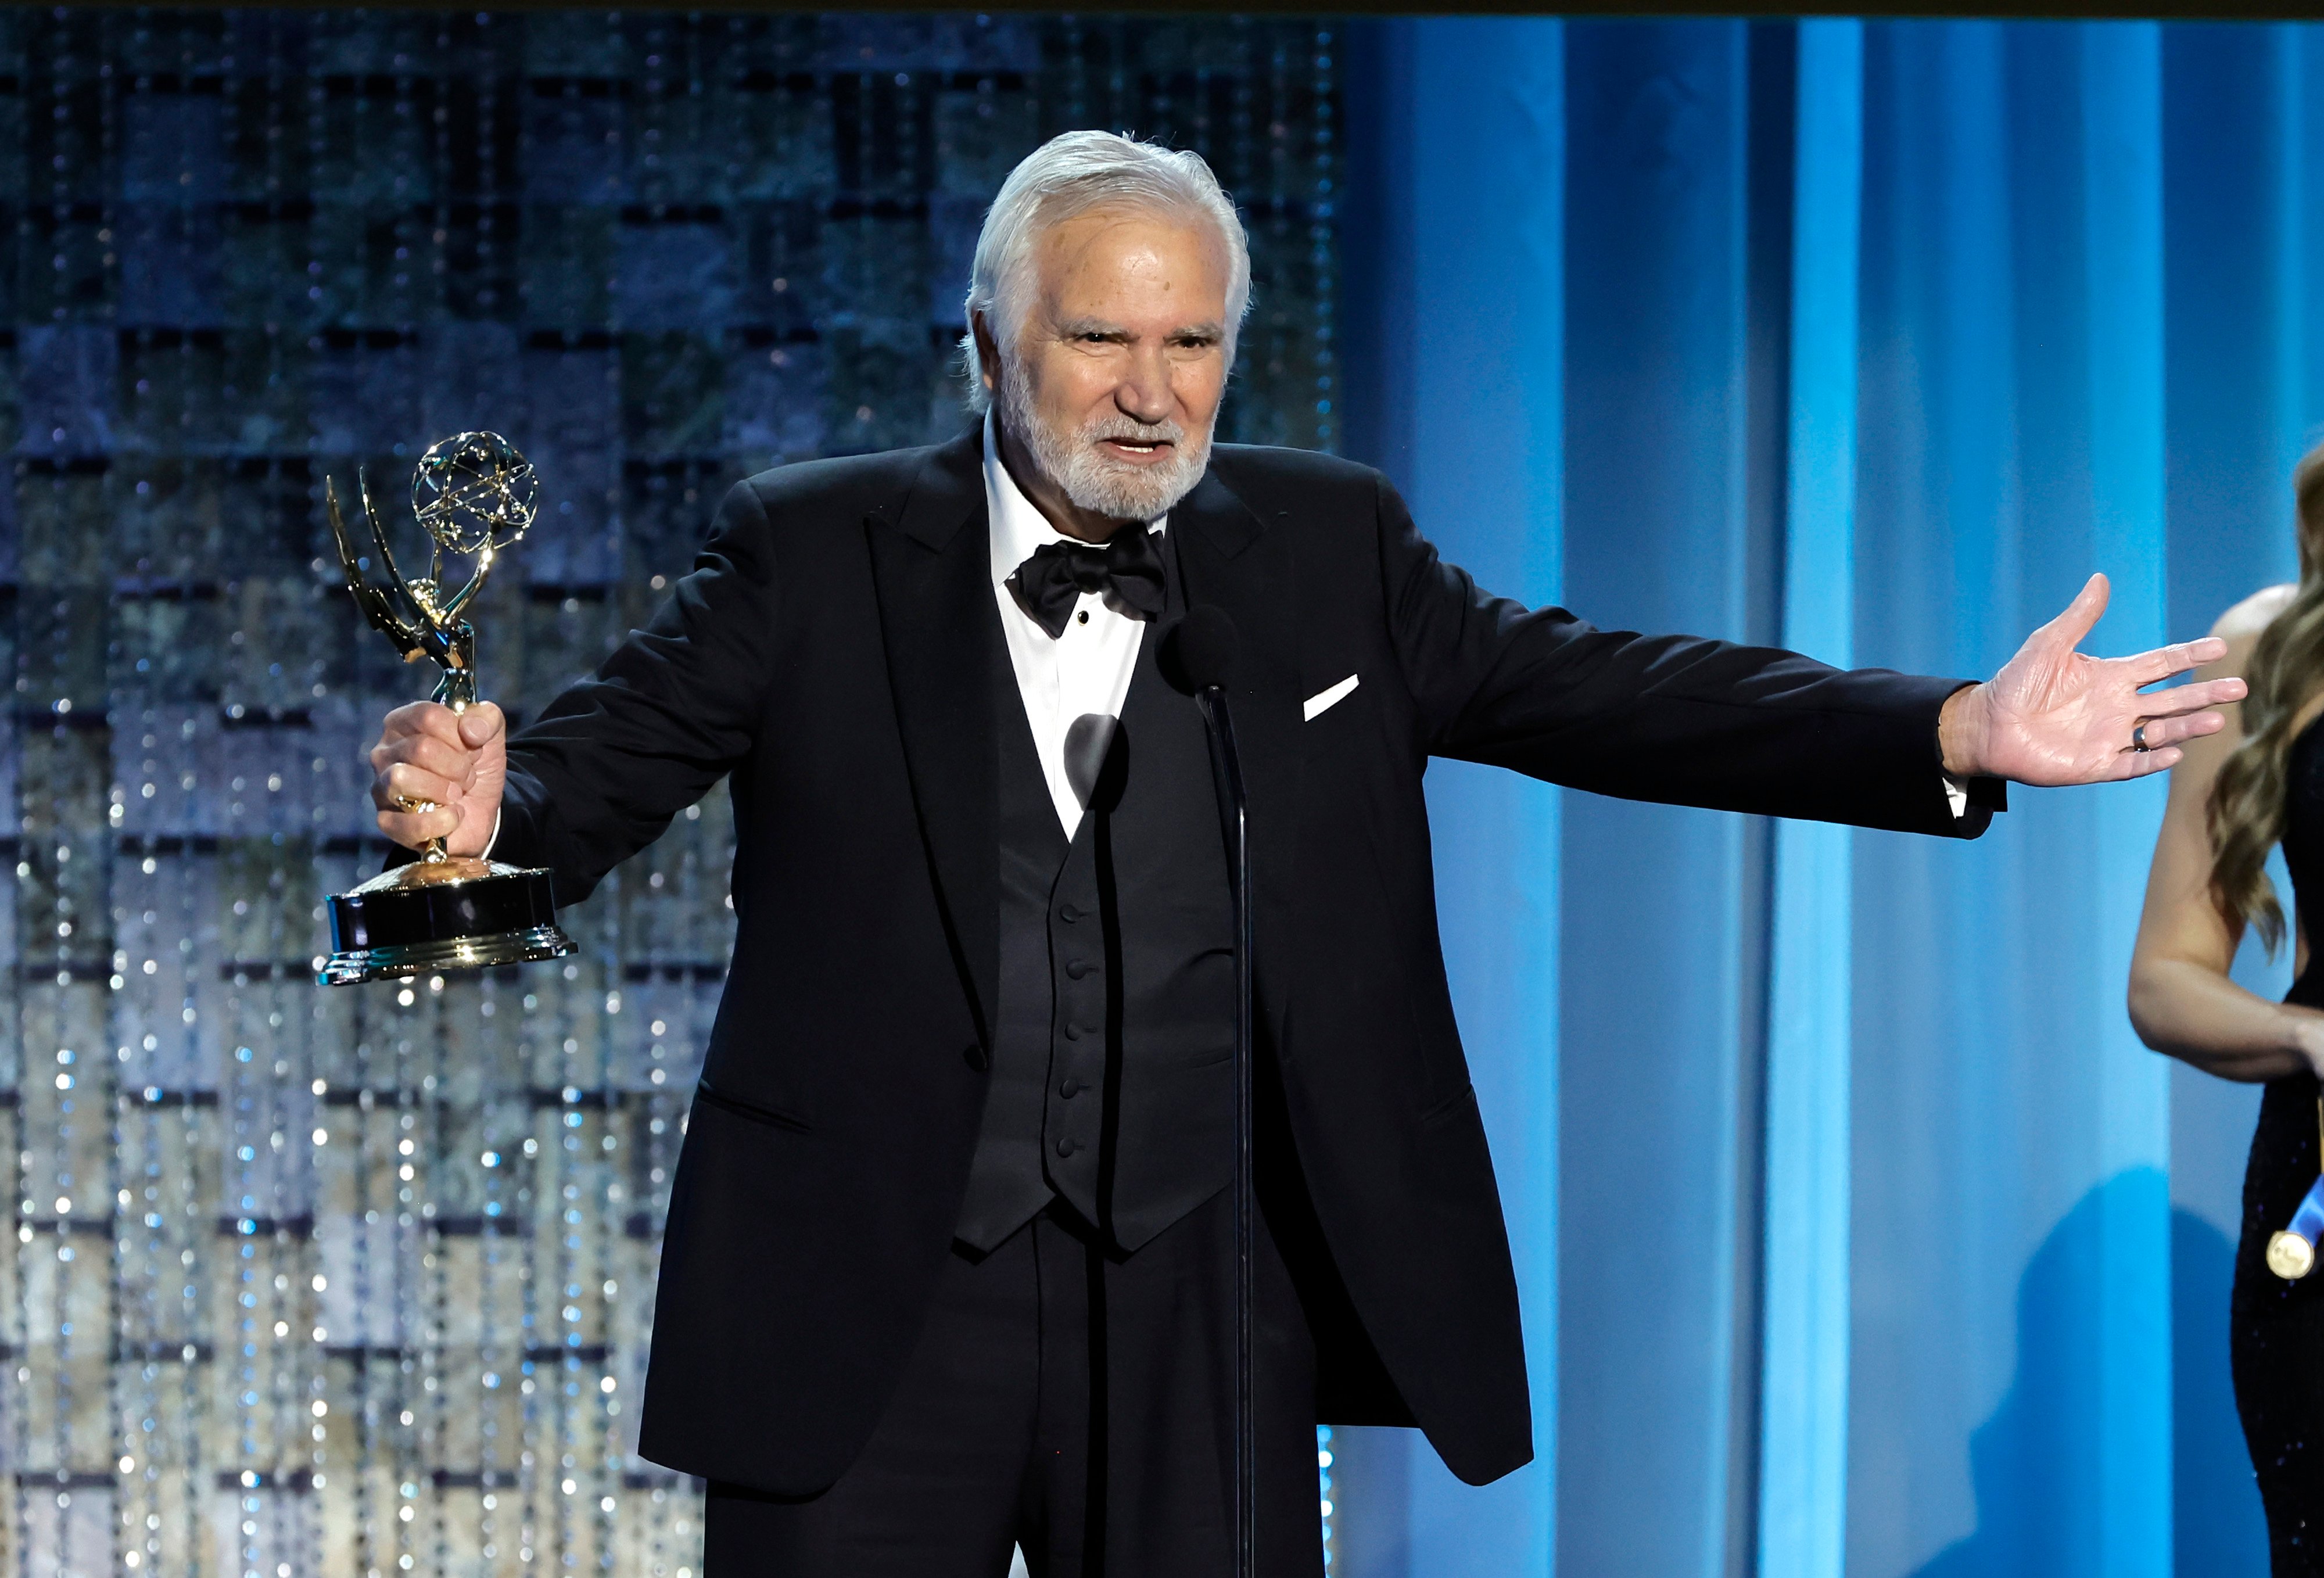 'The Bold and the Beautiful' star John McCook dressed in a tuxedo, celebrates his 2022 Daytime Emmy win onstage.